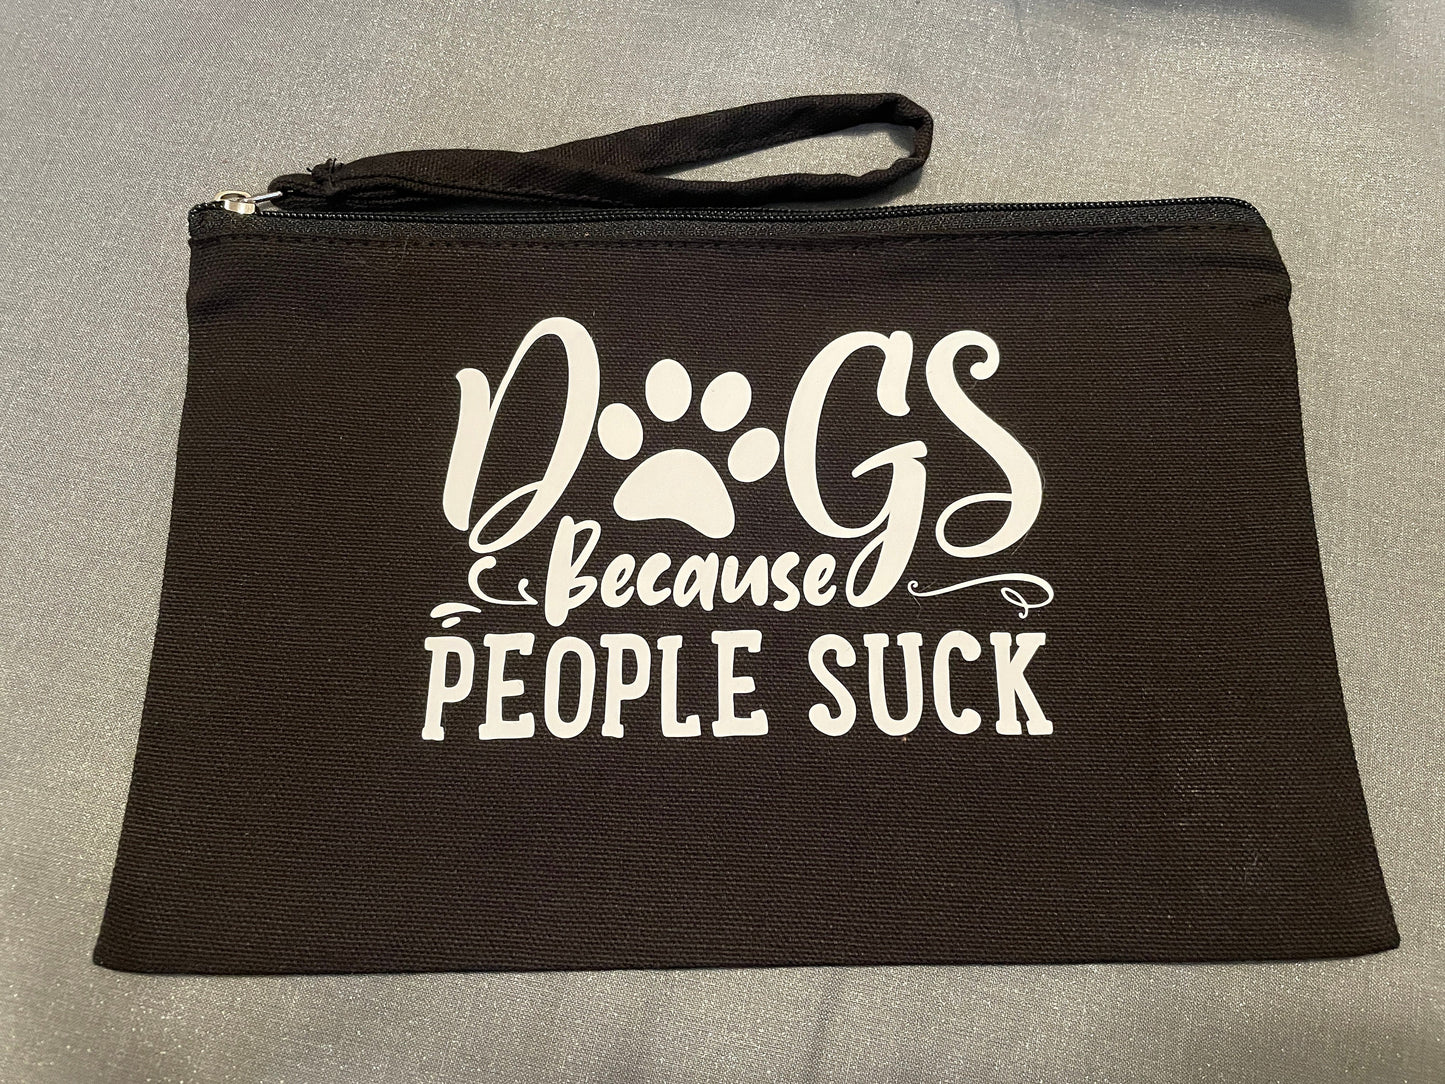 Dogs because people suck Wristlet